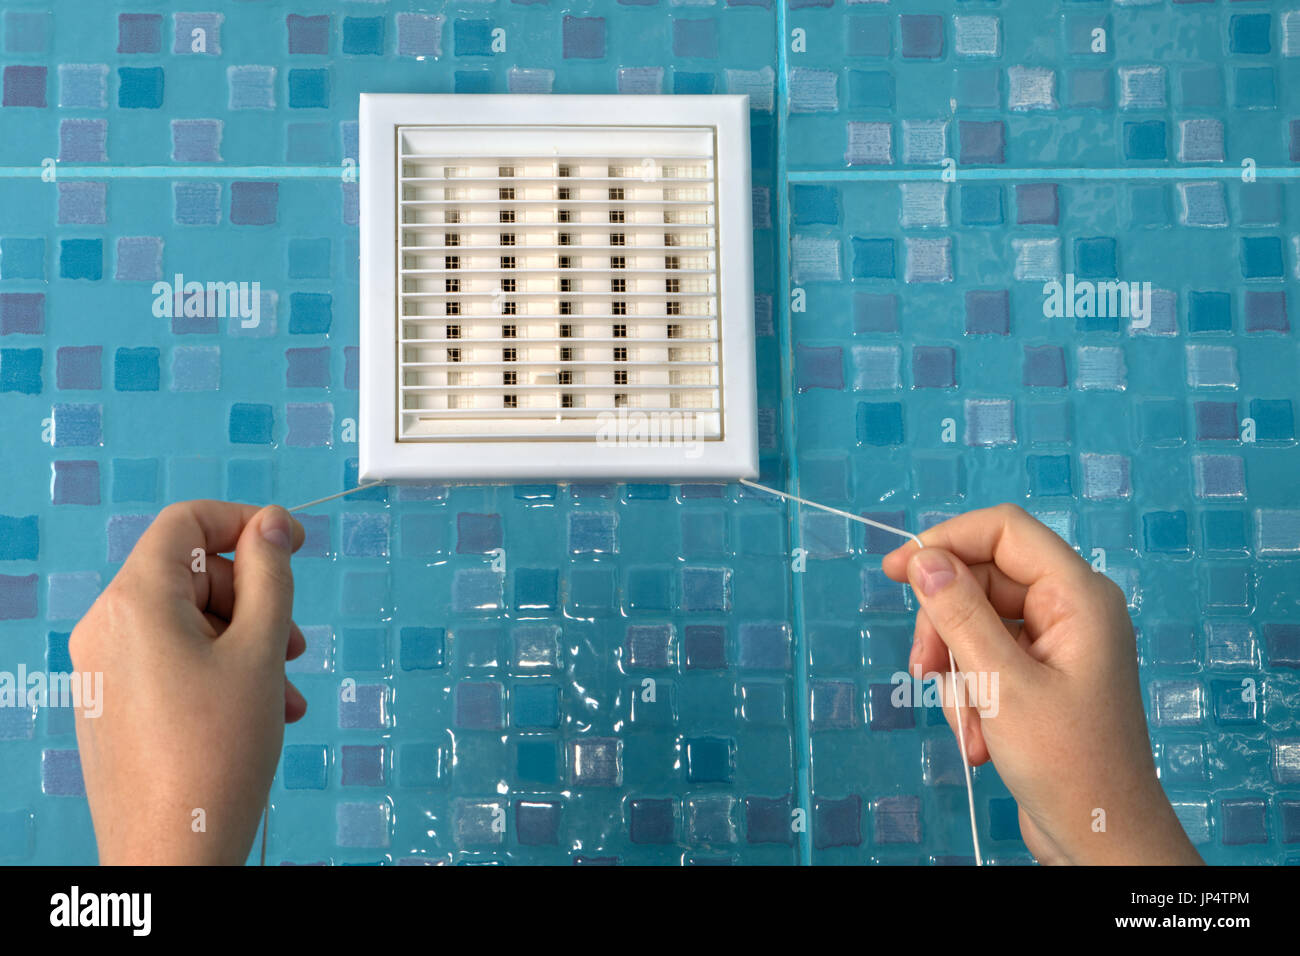 https://c8.alamy.com/comp/JP4TPM/close-up-wall-ventilation-grille-with-pull-cord-air-flow-control-hand-JP4TPM.jpg